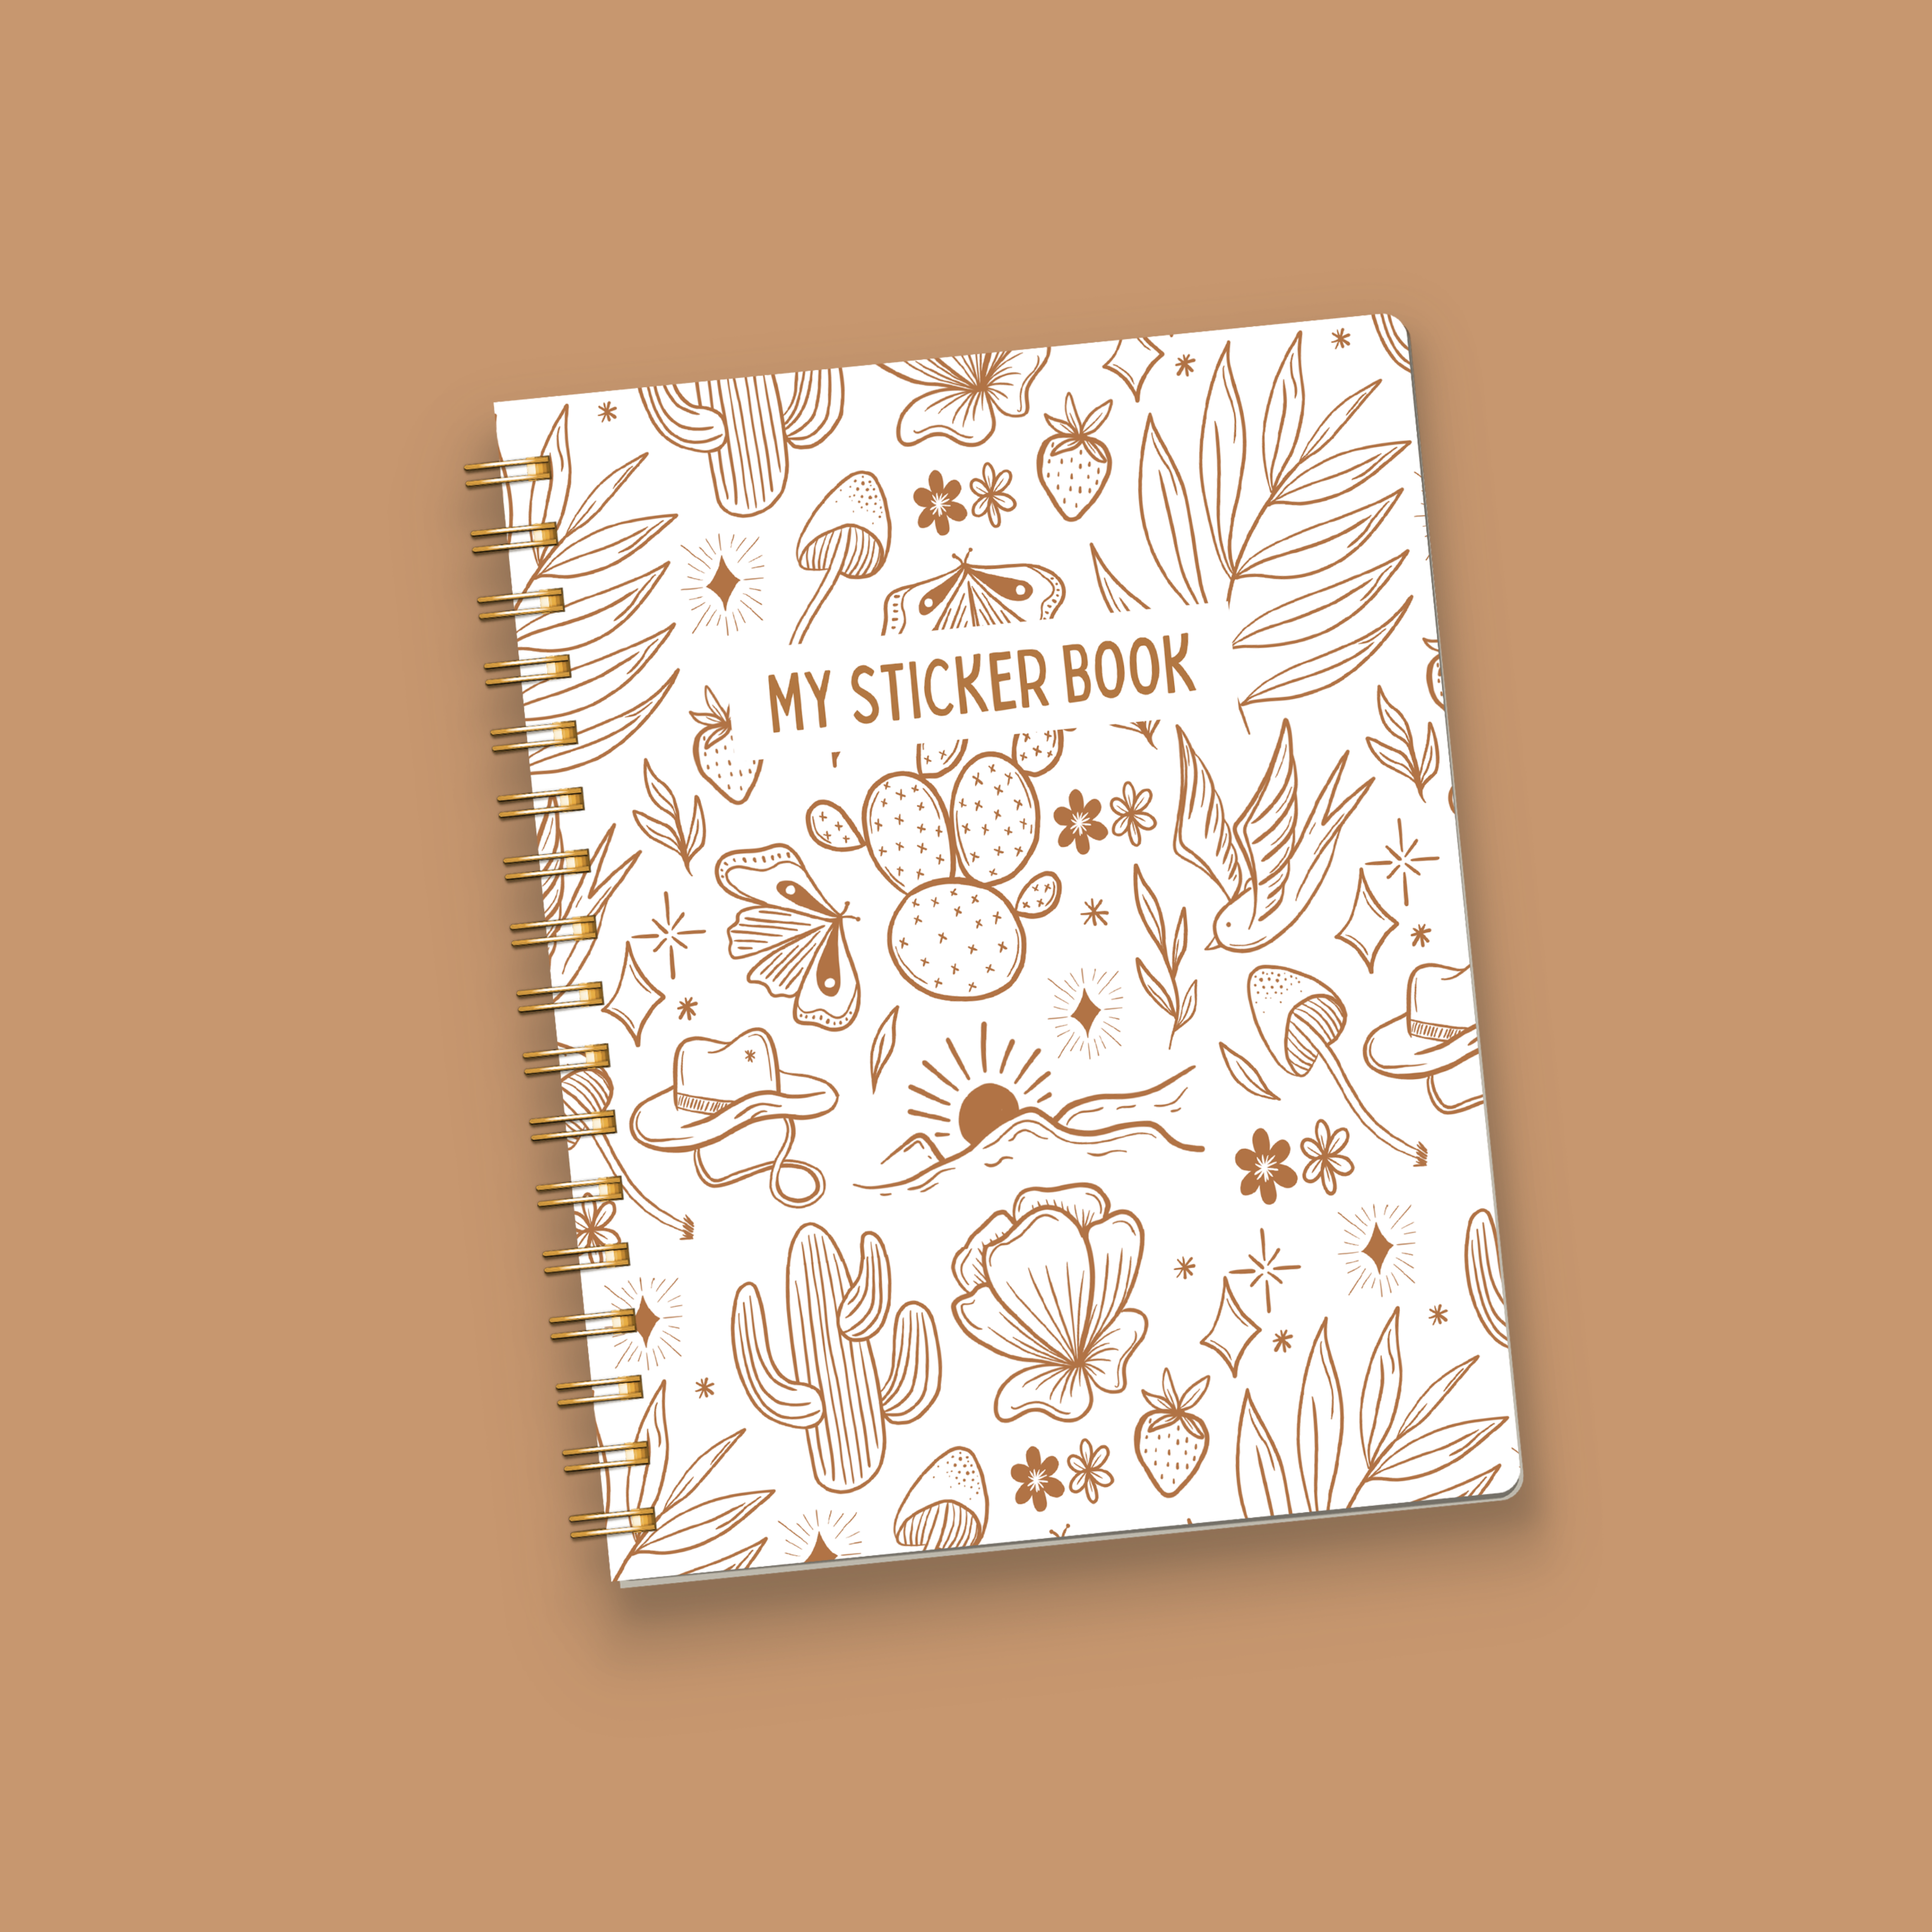 Doodle Sticker Book for Sticker Collecting